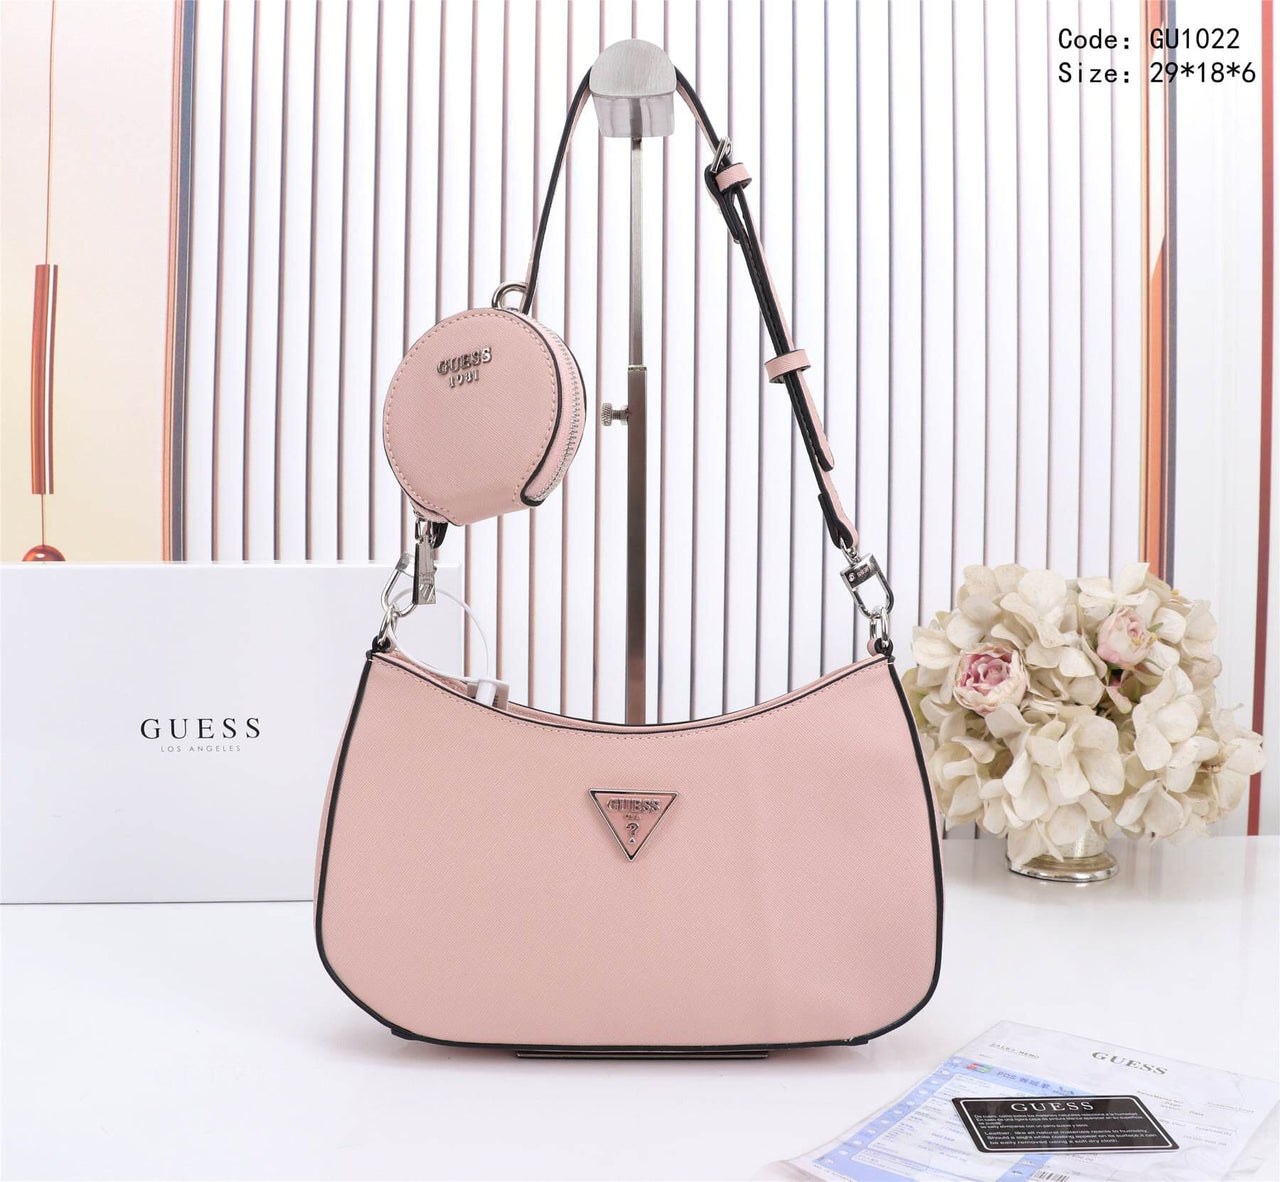 GU1022 Leather Hobo Bag with Coin Purse